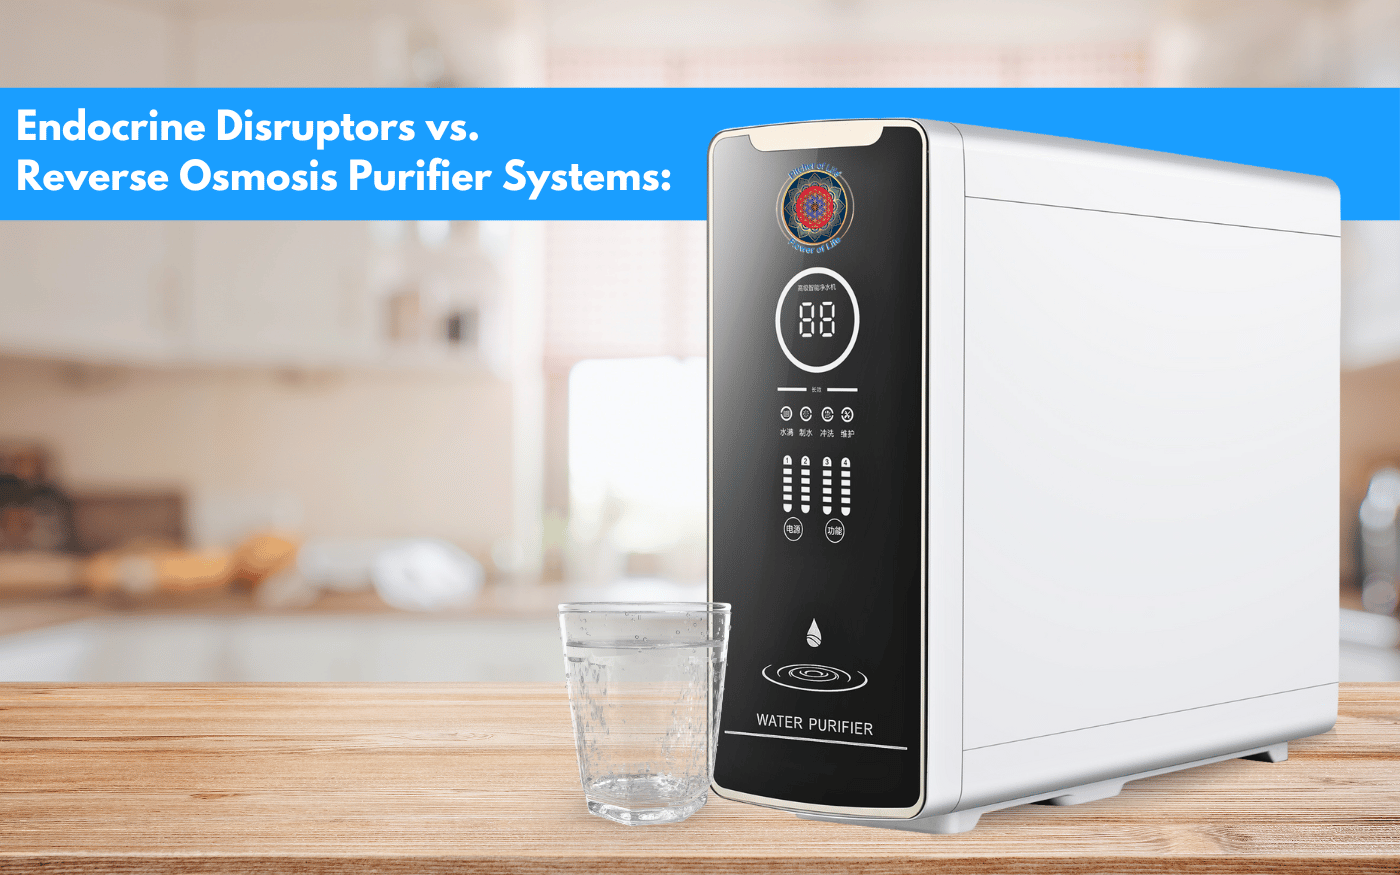 Reverse Osmosis Purifier Systems